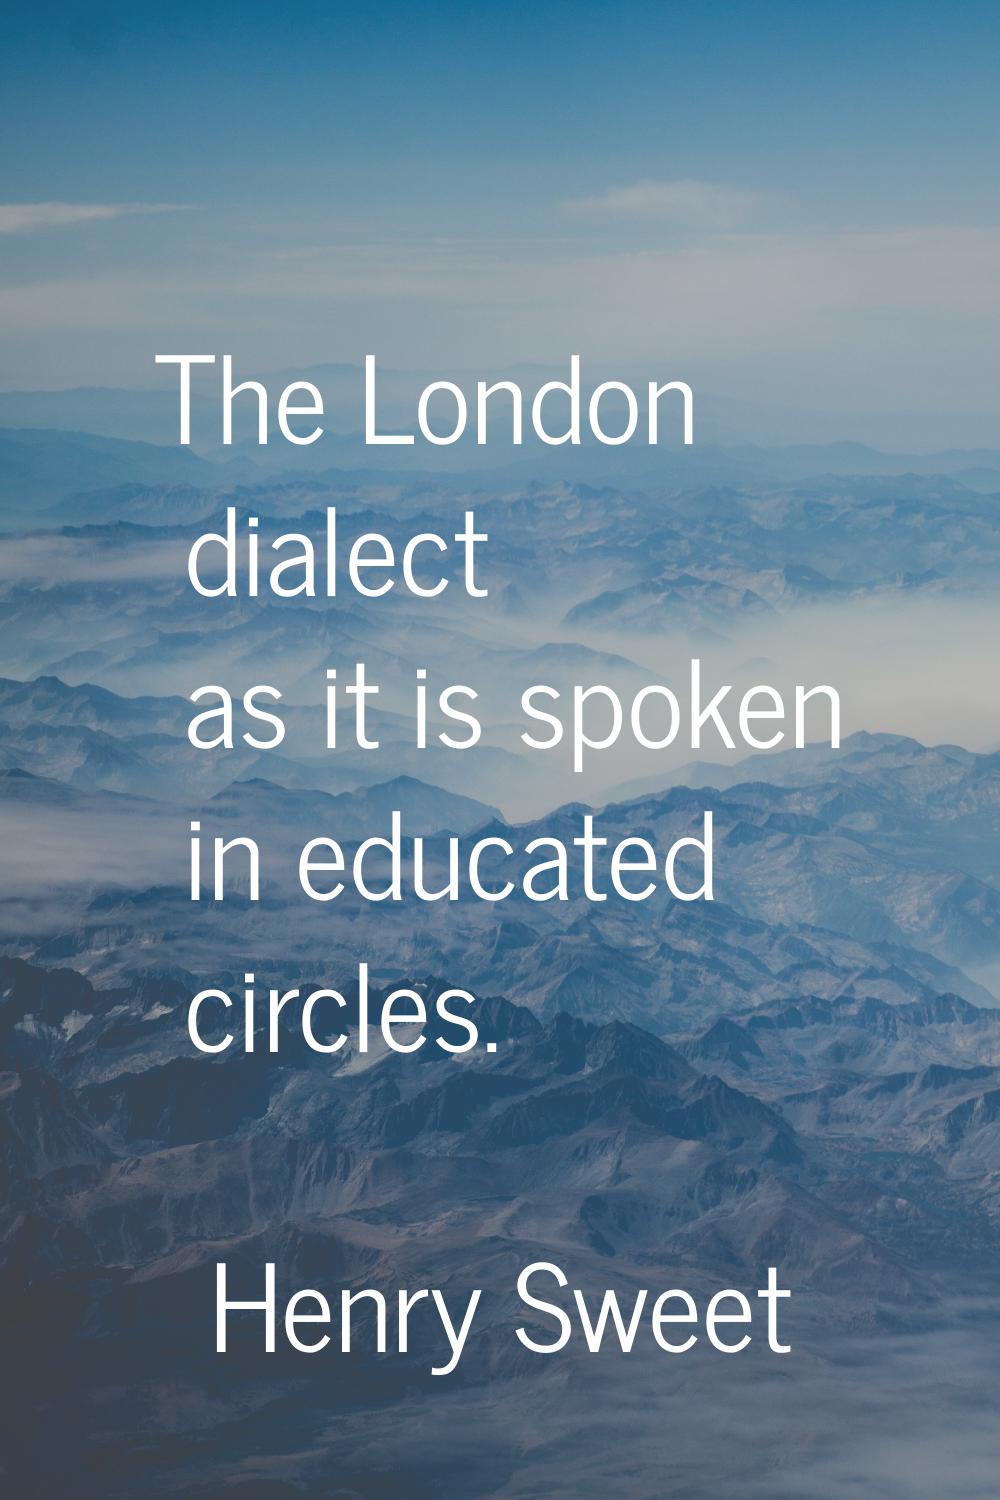 The London dialect as it is spoken in educated circles.